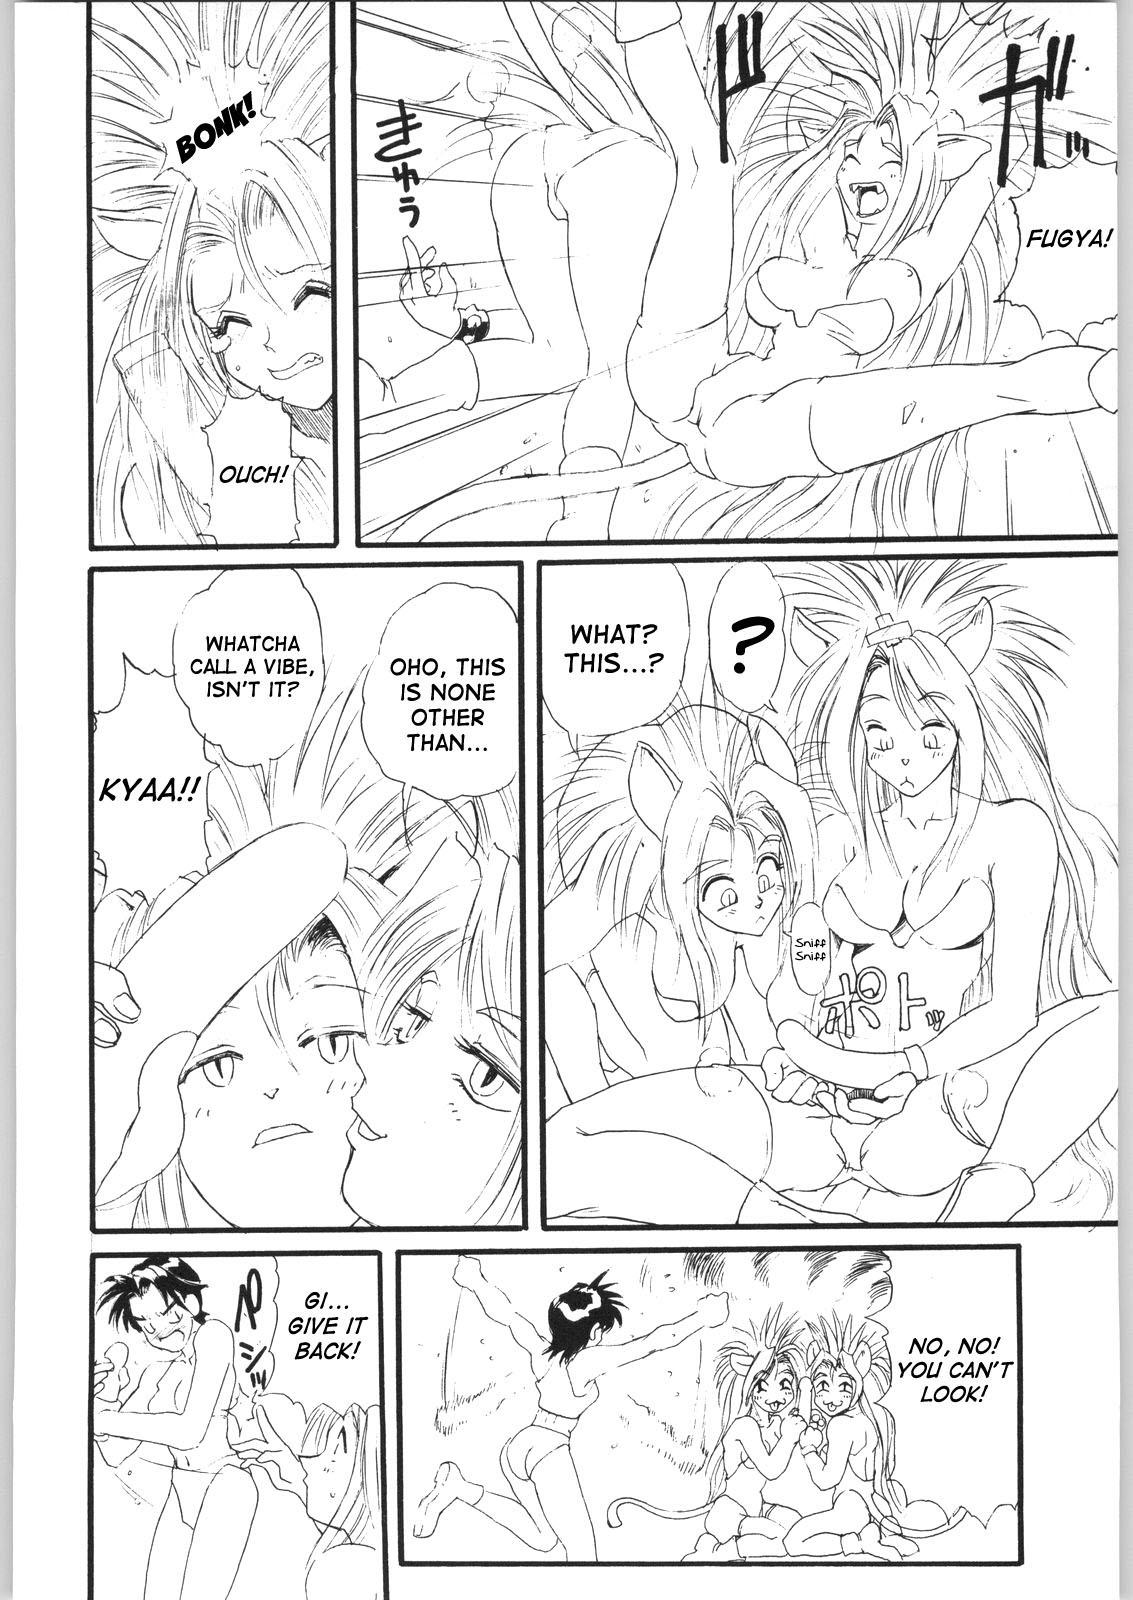 Face Fuck Close Up Gendai: Remedial Leona - Dominion tank police Perverted - Page 5